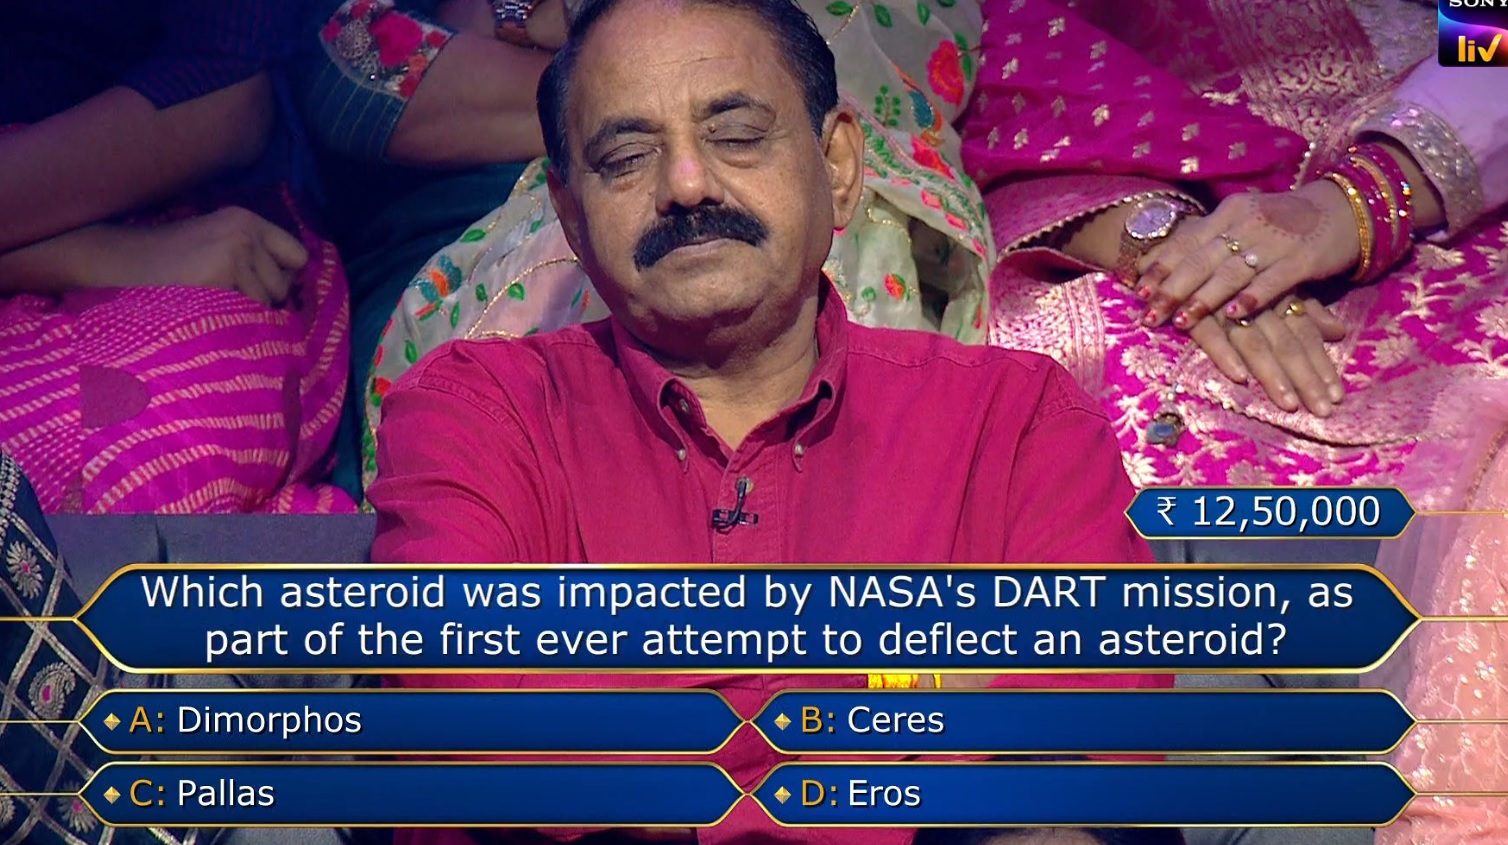 Ques : Which asteroid was impacted by NASA’s DART mission, as part of the first ever attempt to deflect an asteroid?